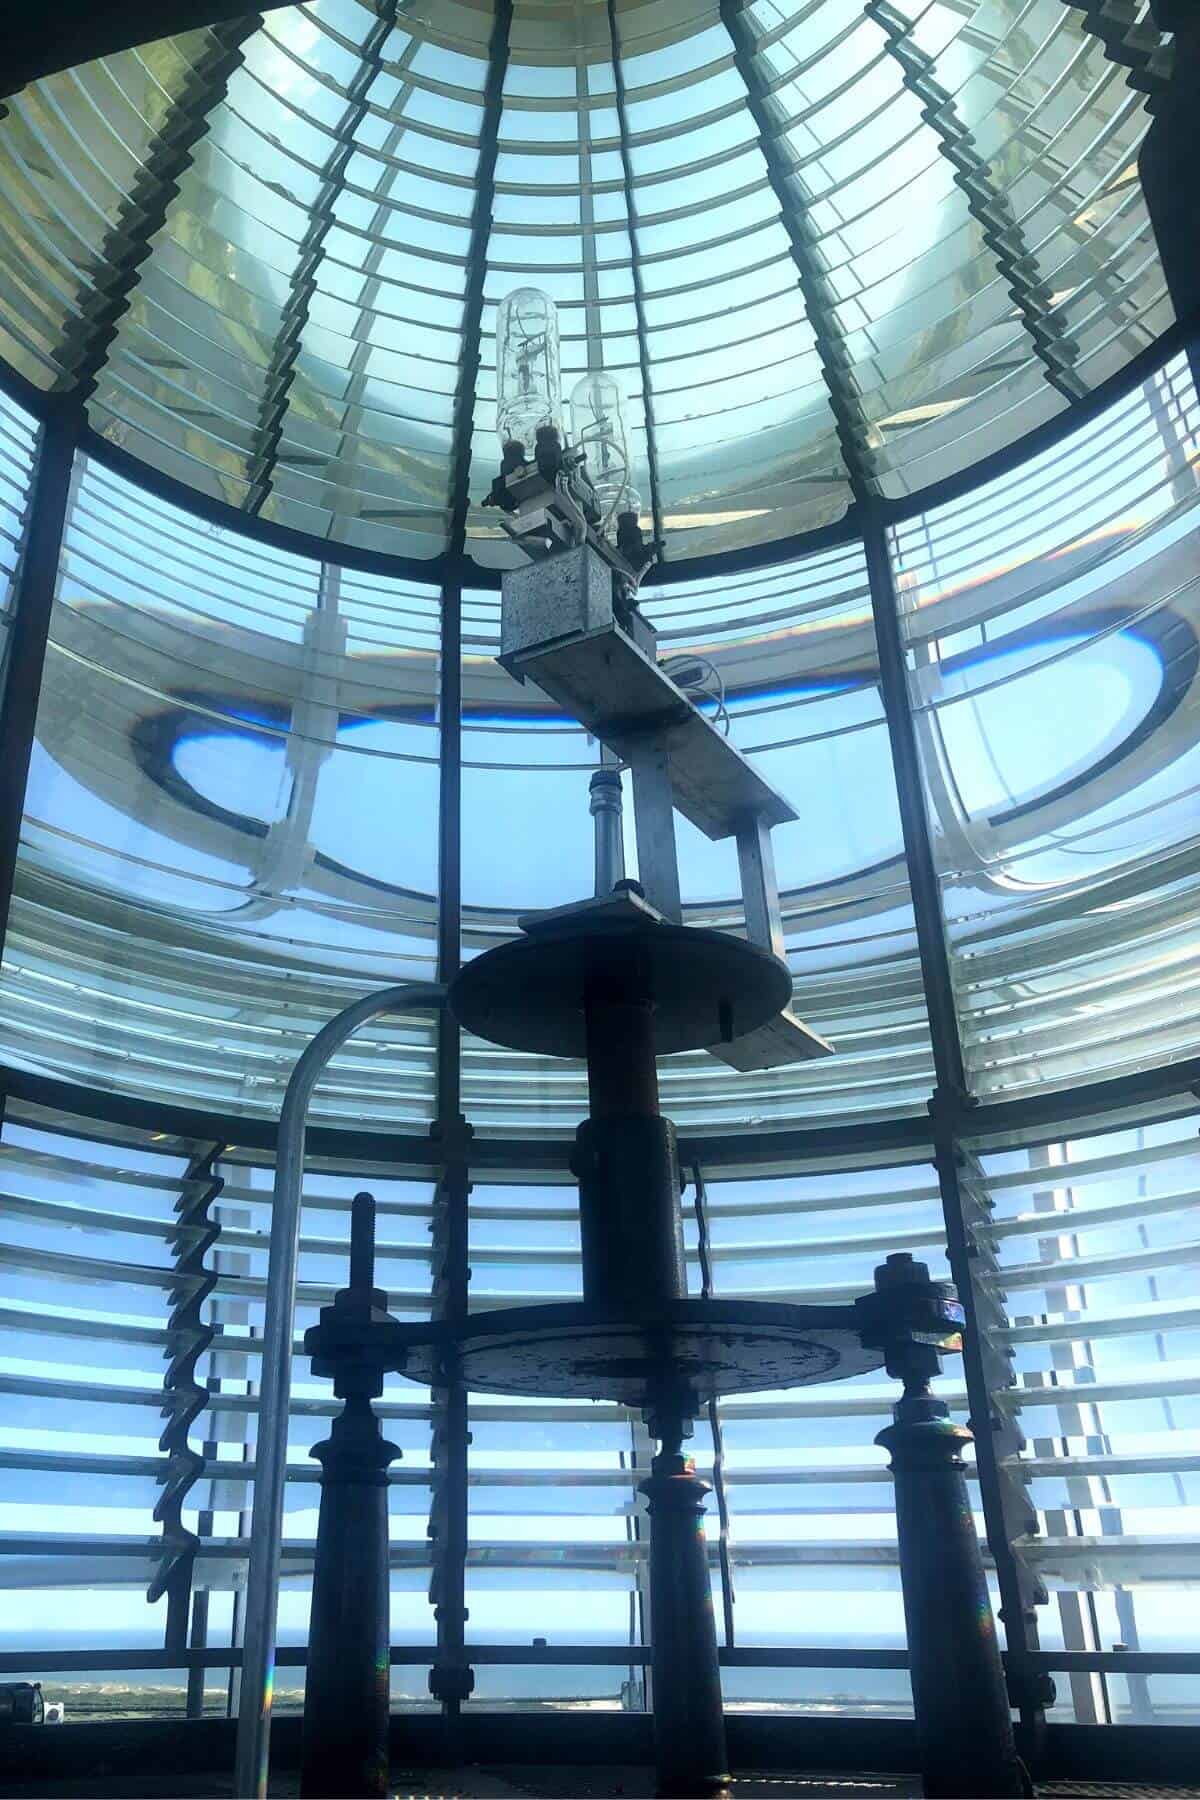 First-order Fresnel Lens at the top of the lighthouse.